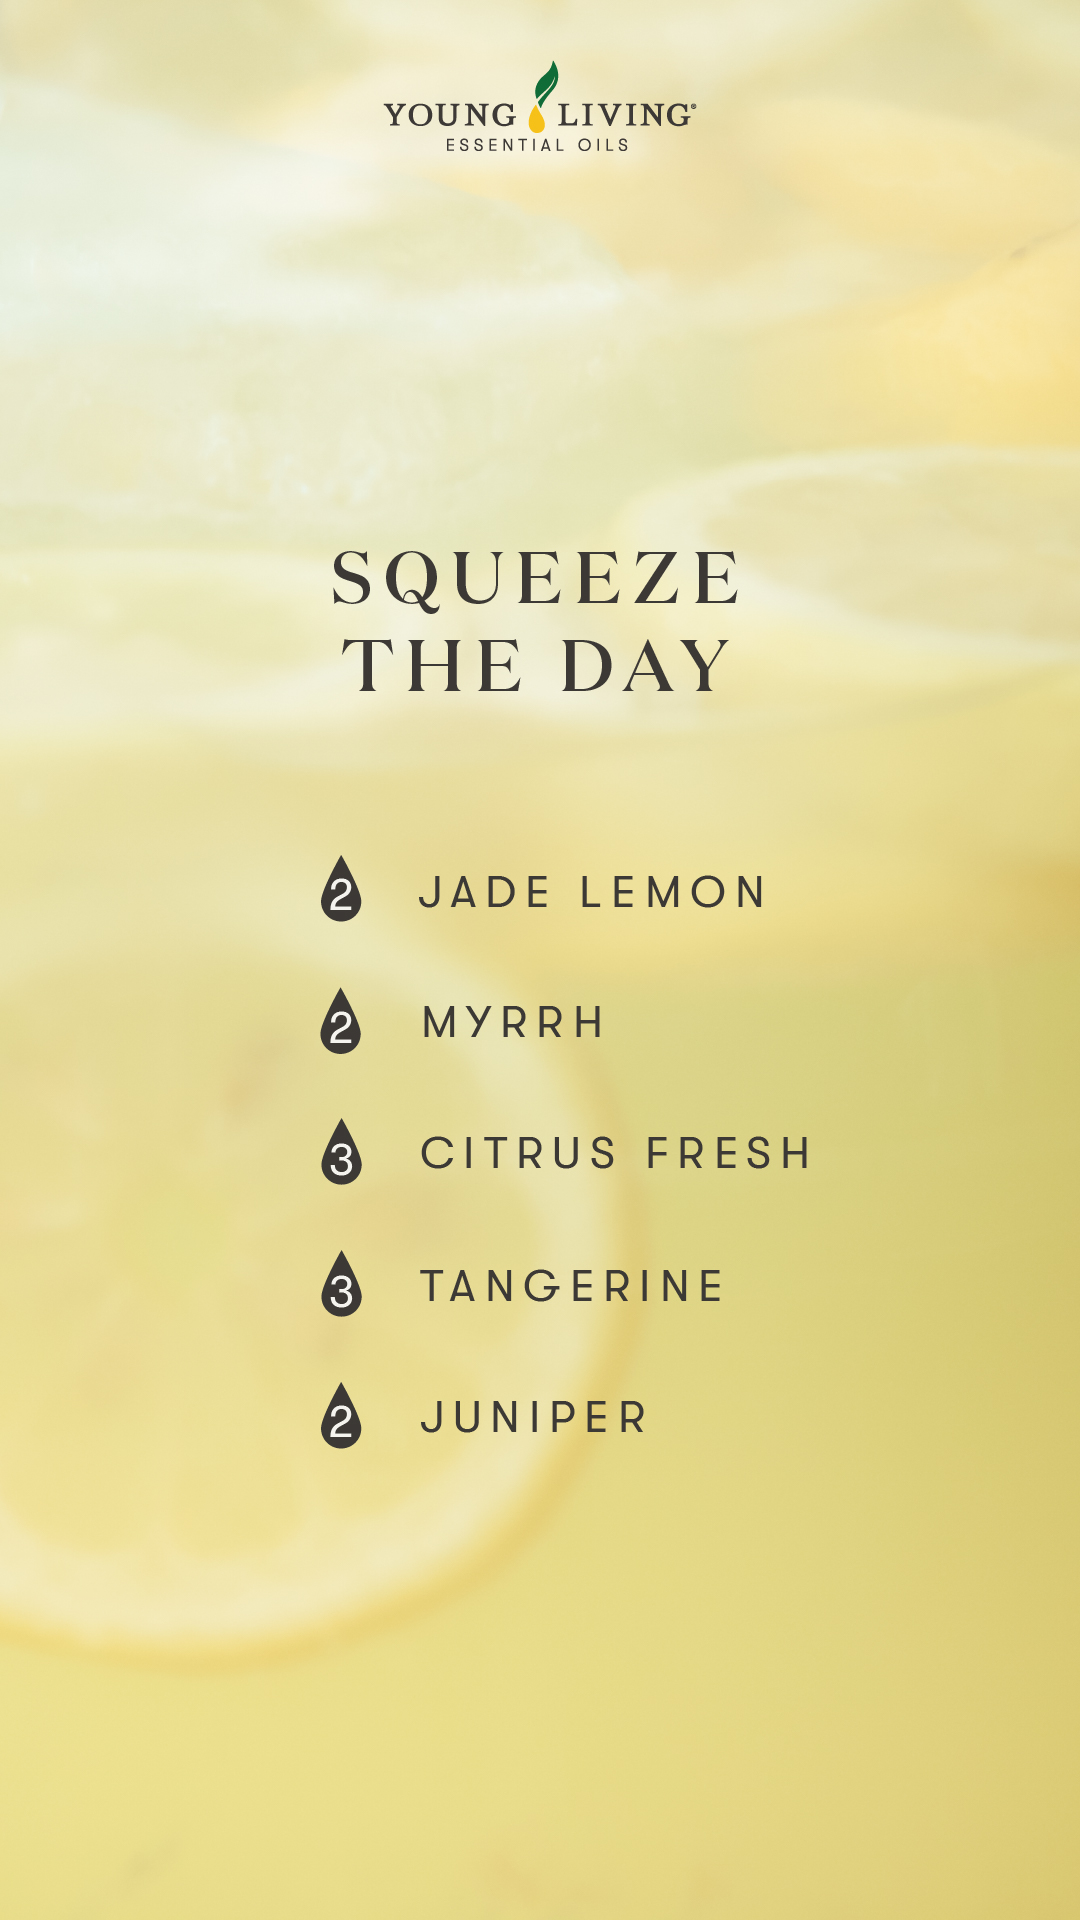 Squeeze the day diffuser blend